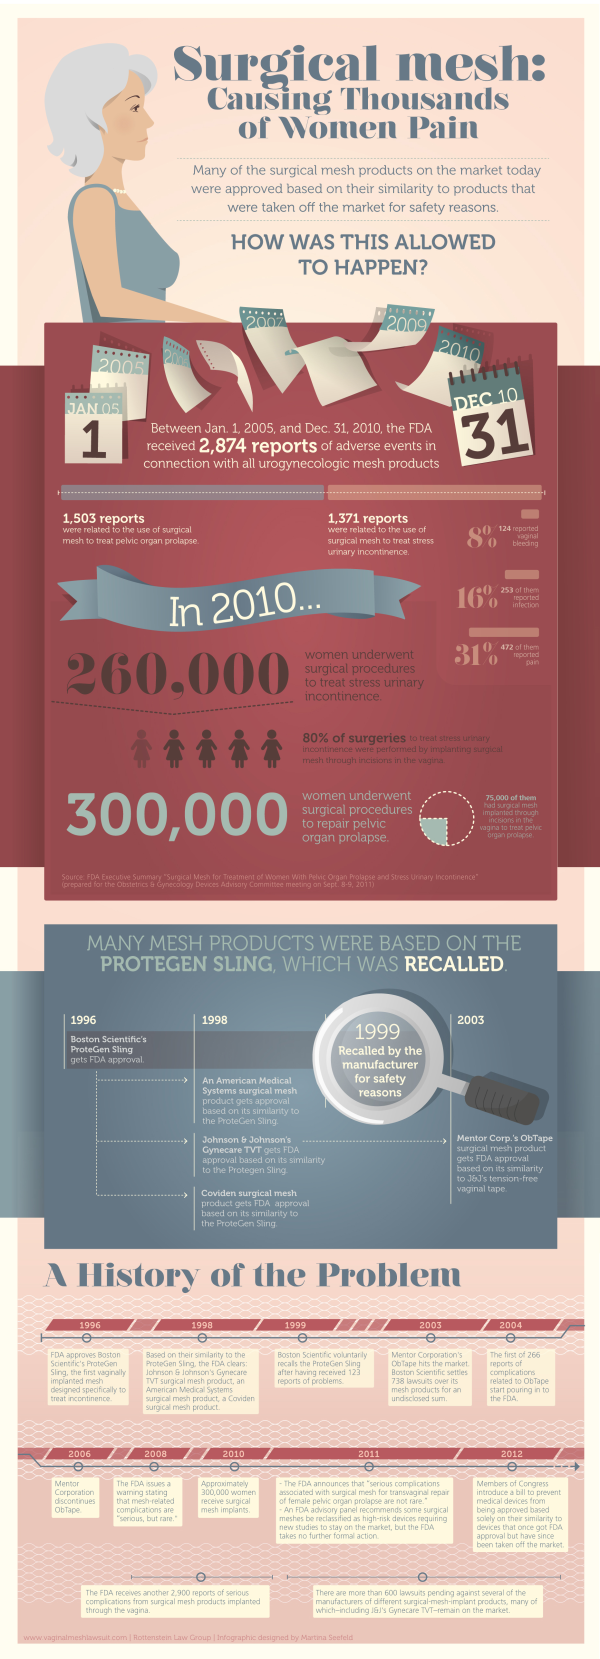 transvaginal mesh lawsuit infographic resized 600